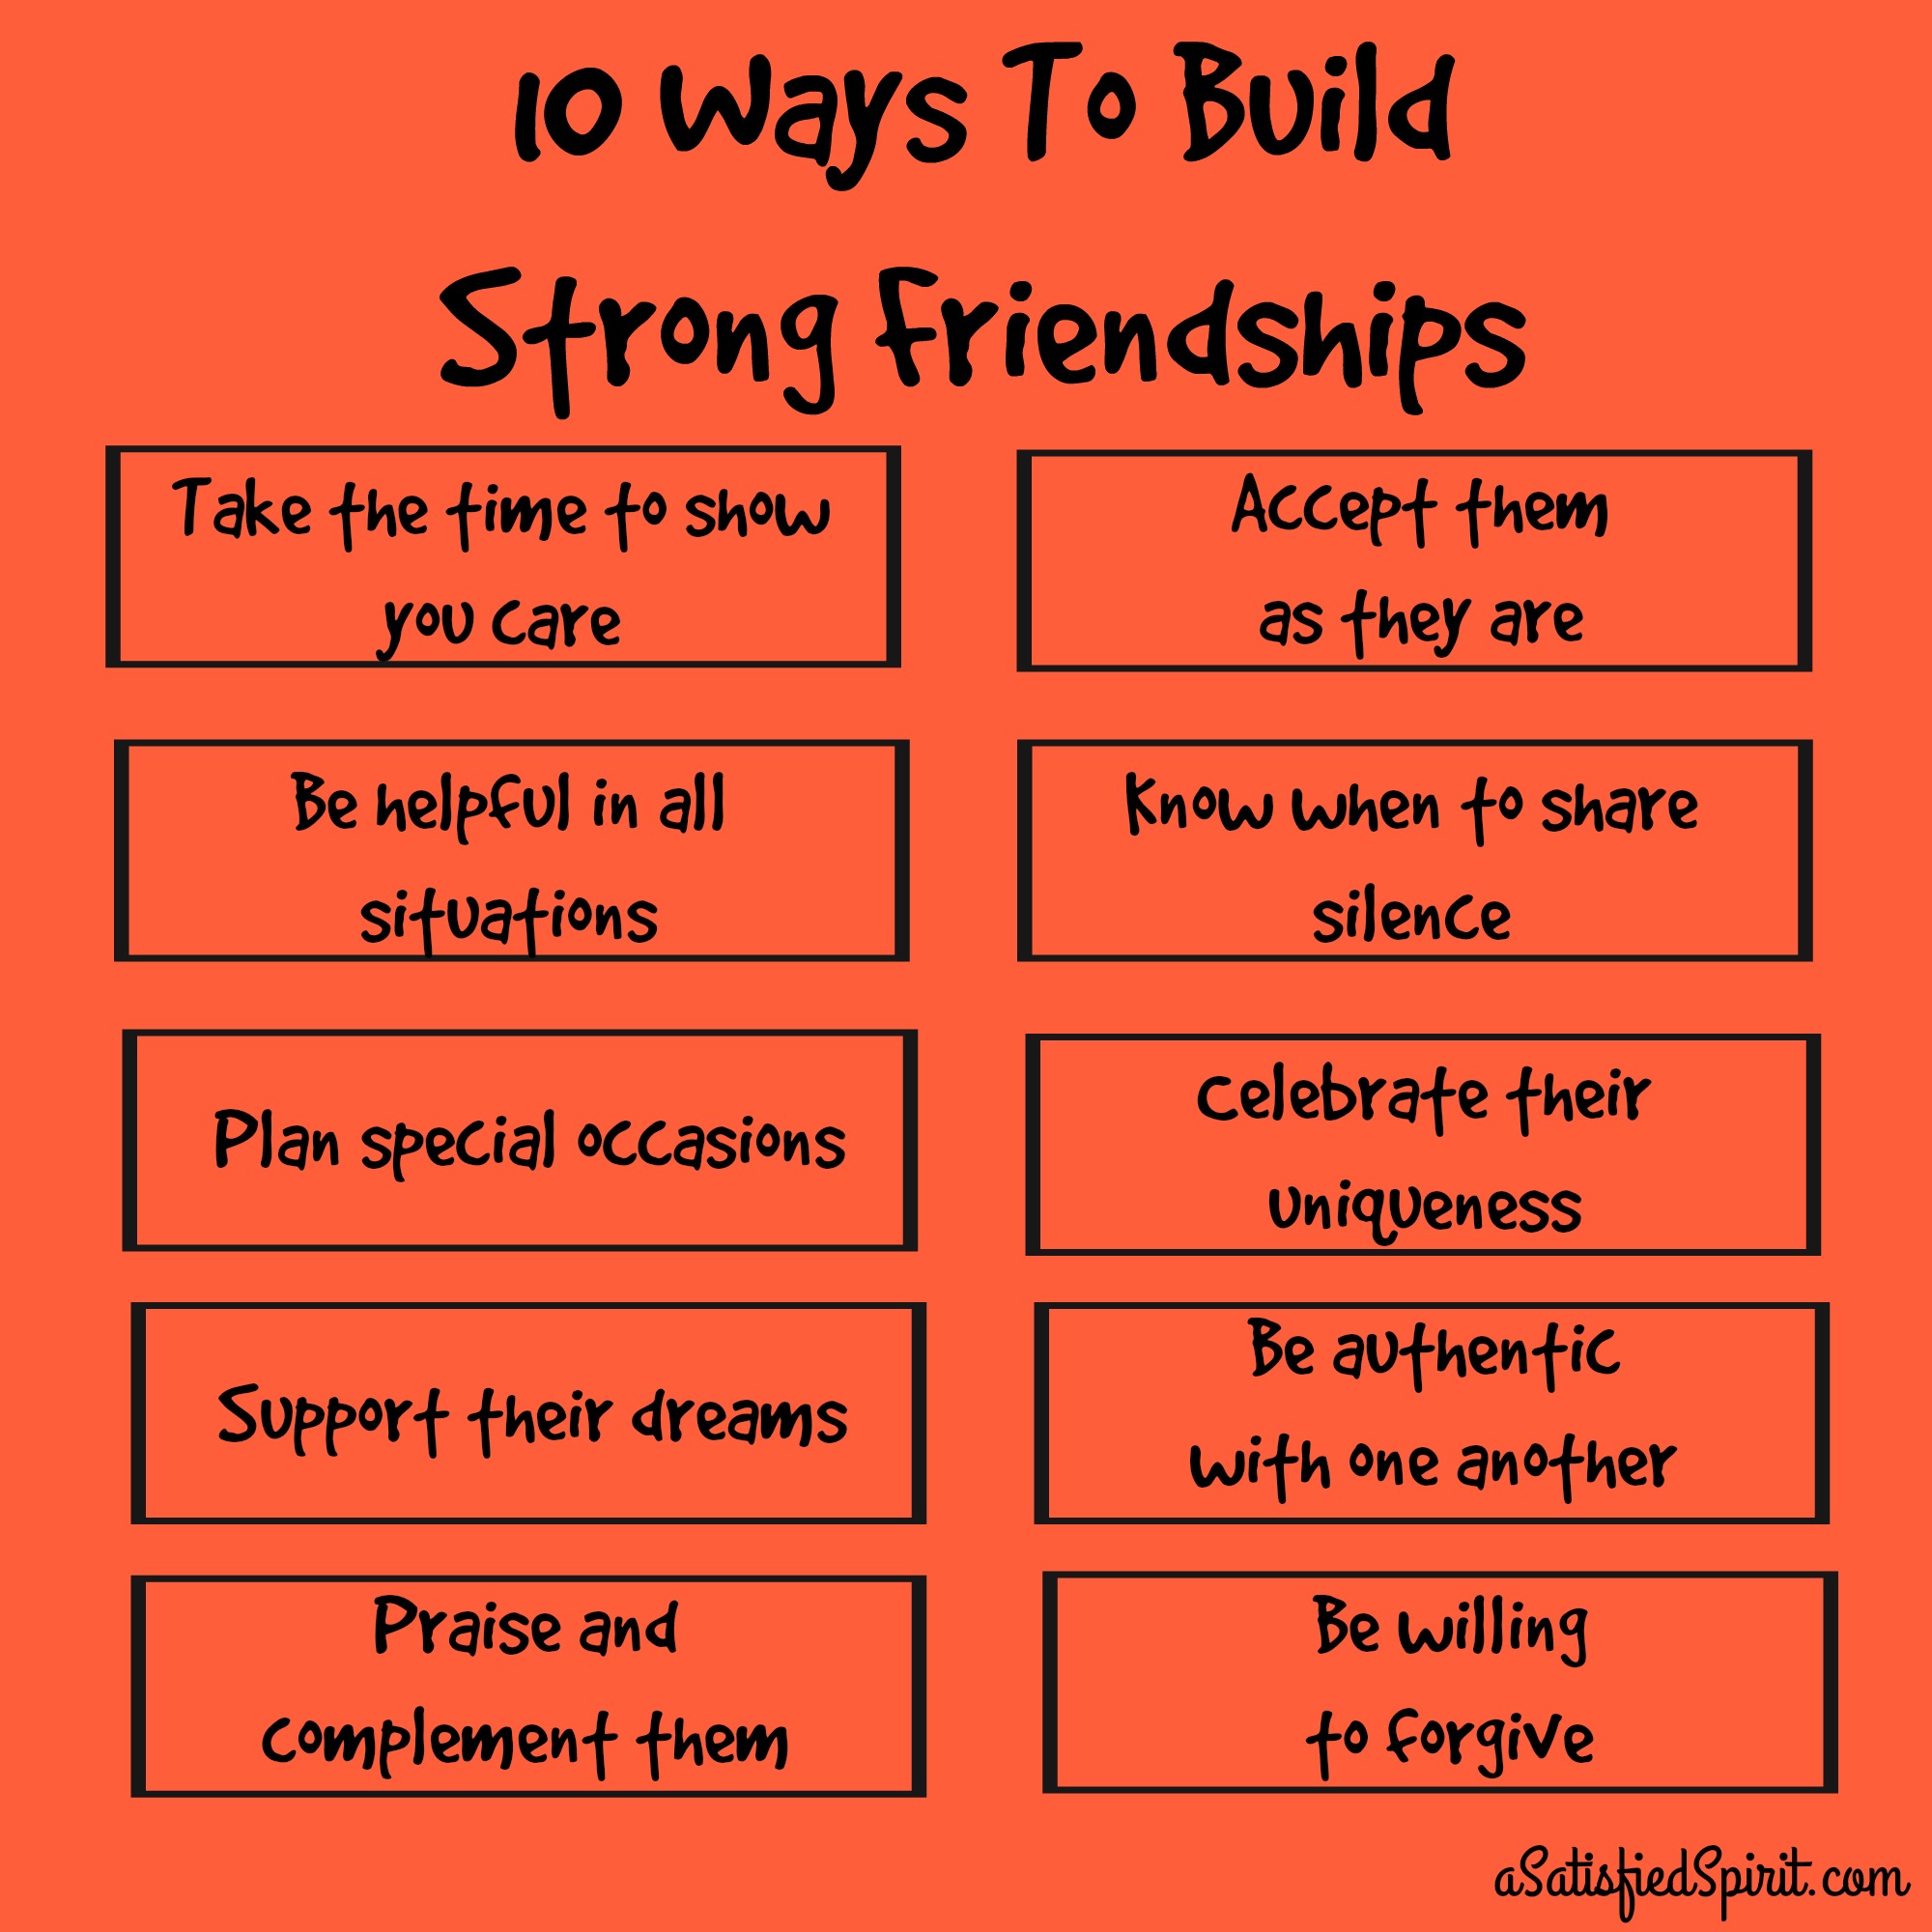 How To Be Friendly? 10 Ways To Be Friendly & Make Friends